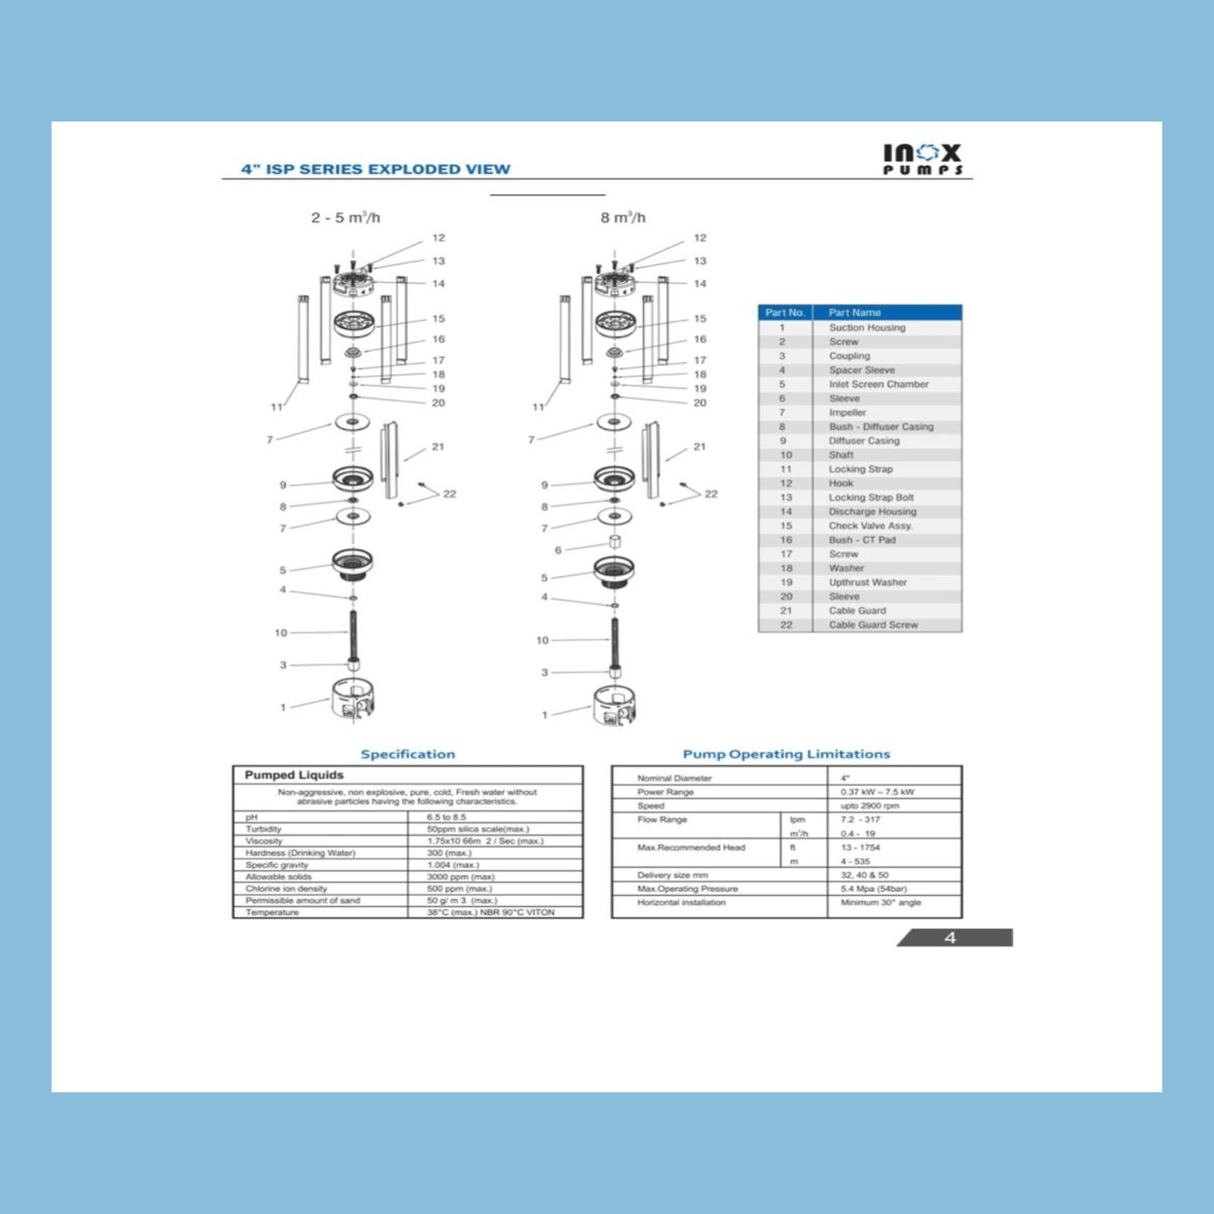 Inox ISP - 8/30, 4inch Submersible Pump for wells, 400V, 5.5kw motor, Flow rate: 8 m3/hr, Head: 123m